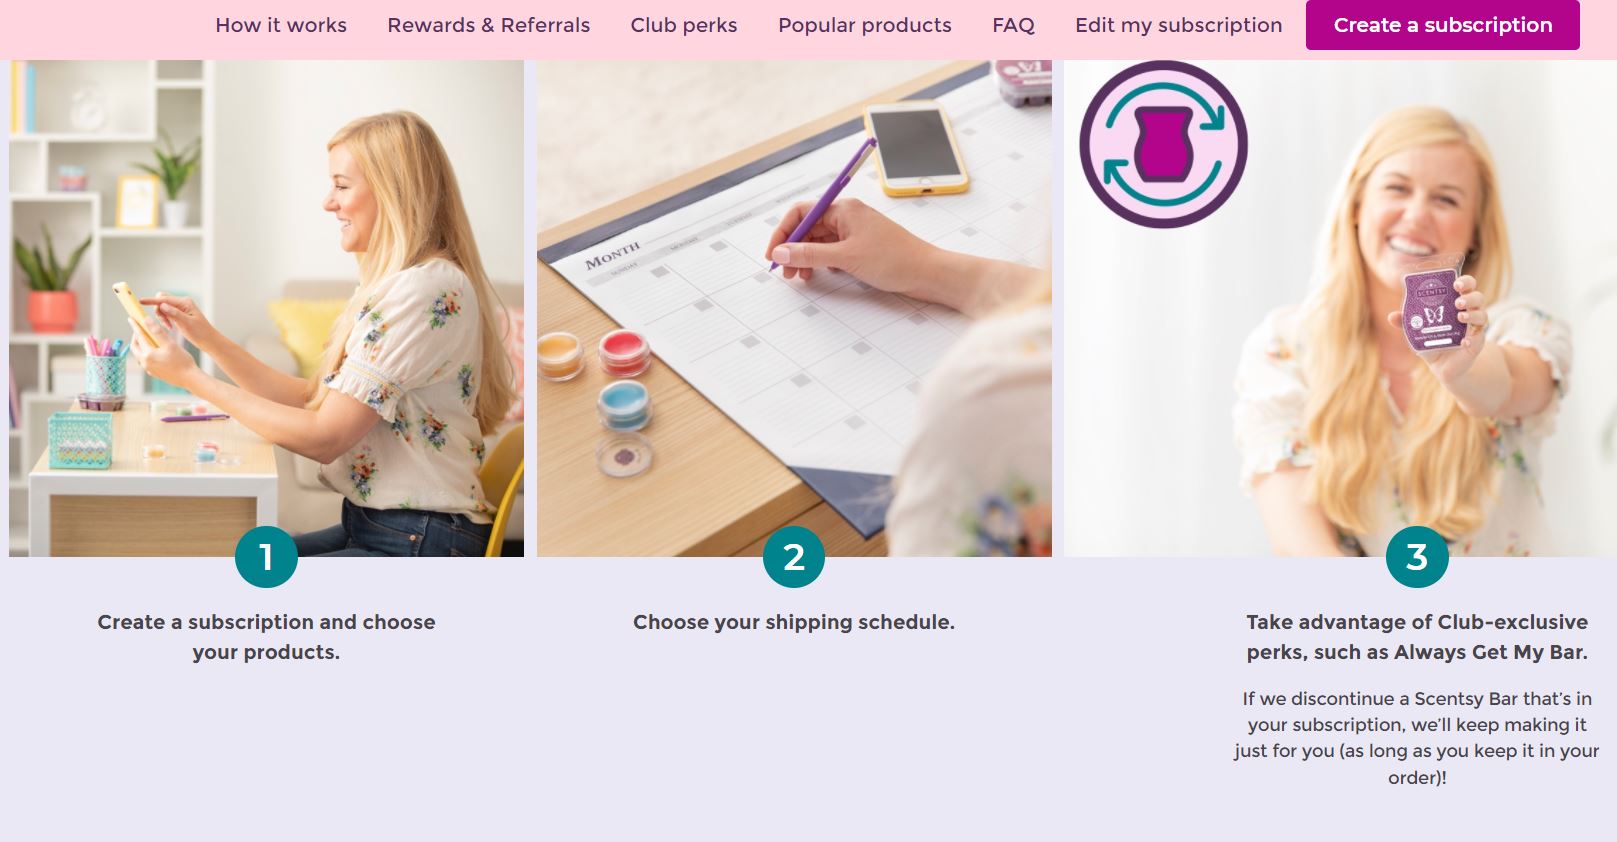 Scentsy club website shows a girl scheduling her appointments in three-step instruction